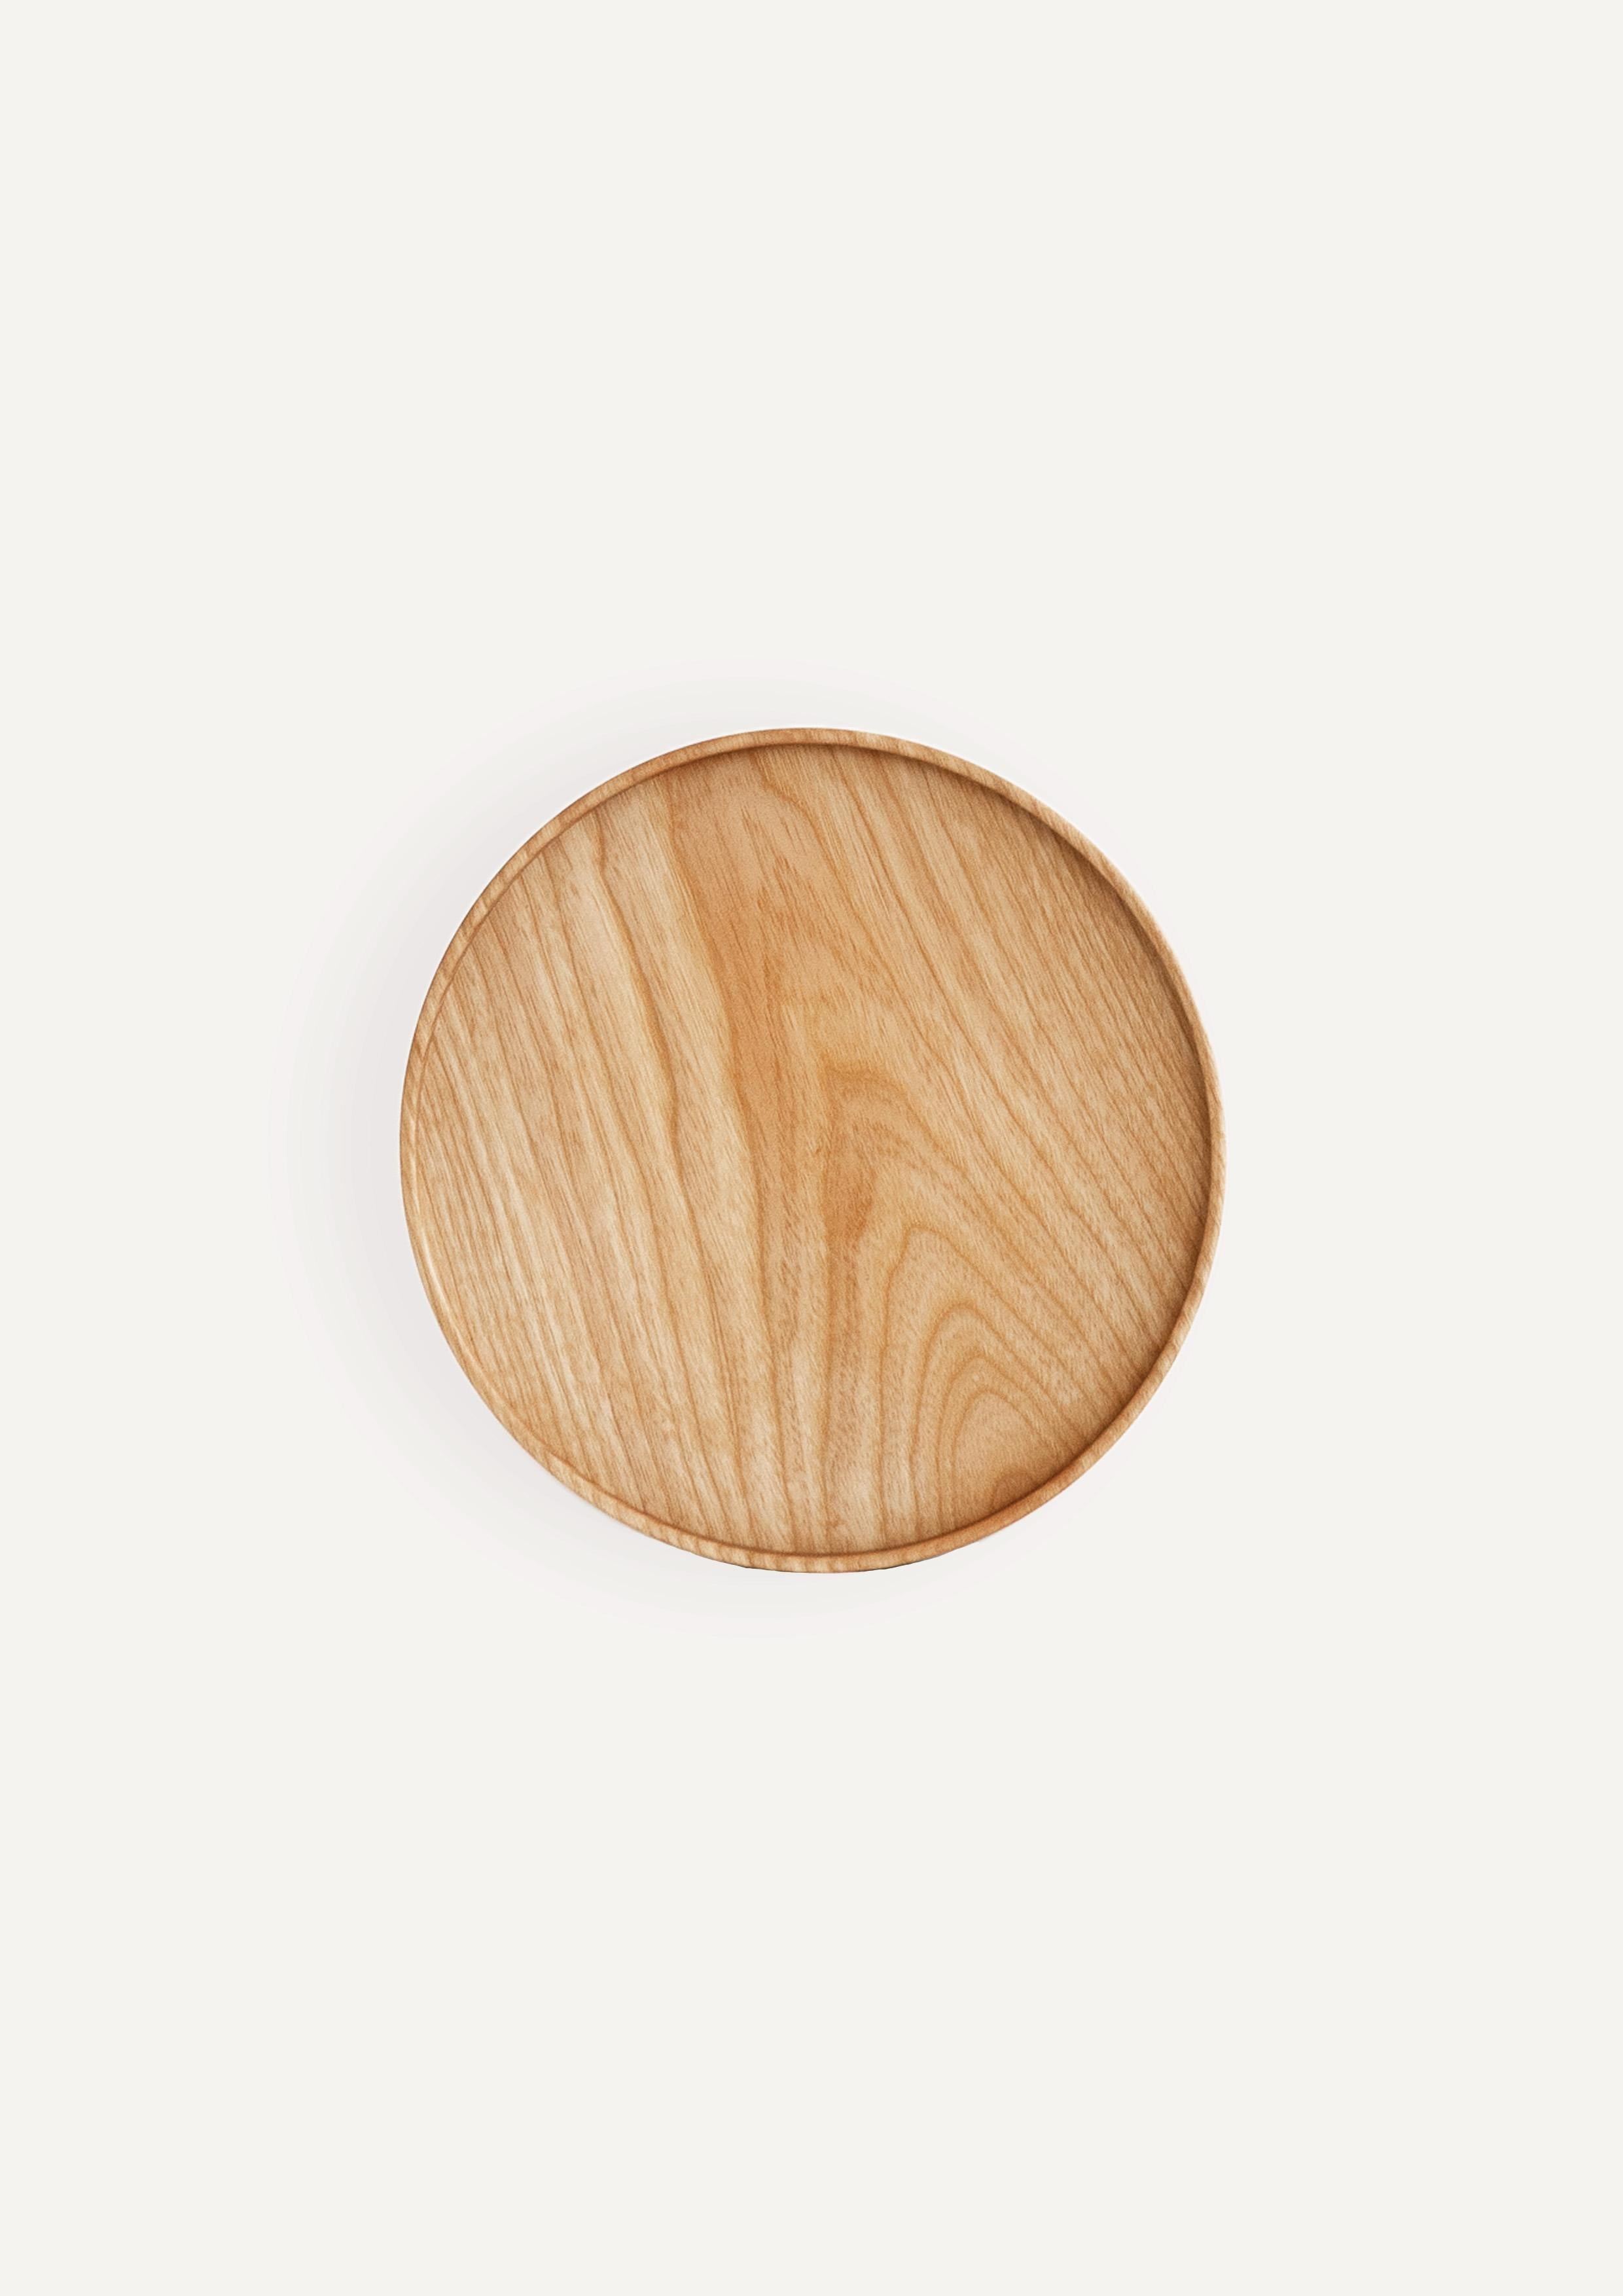 French Stackable Plates, ash wood, handmade in France, OROS Edition  For Sale